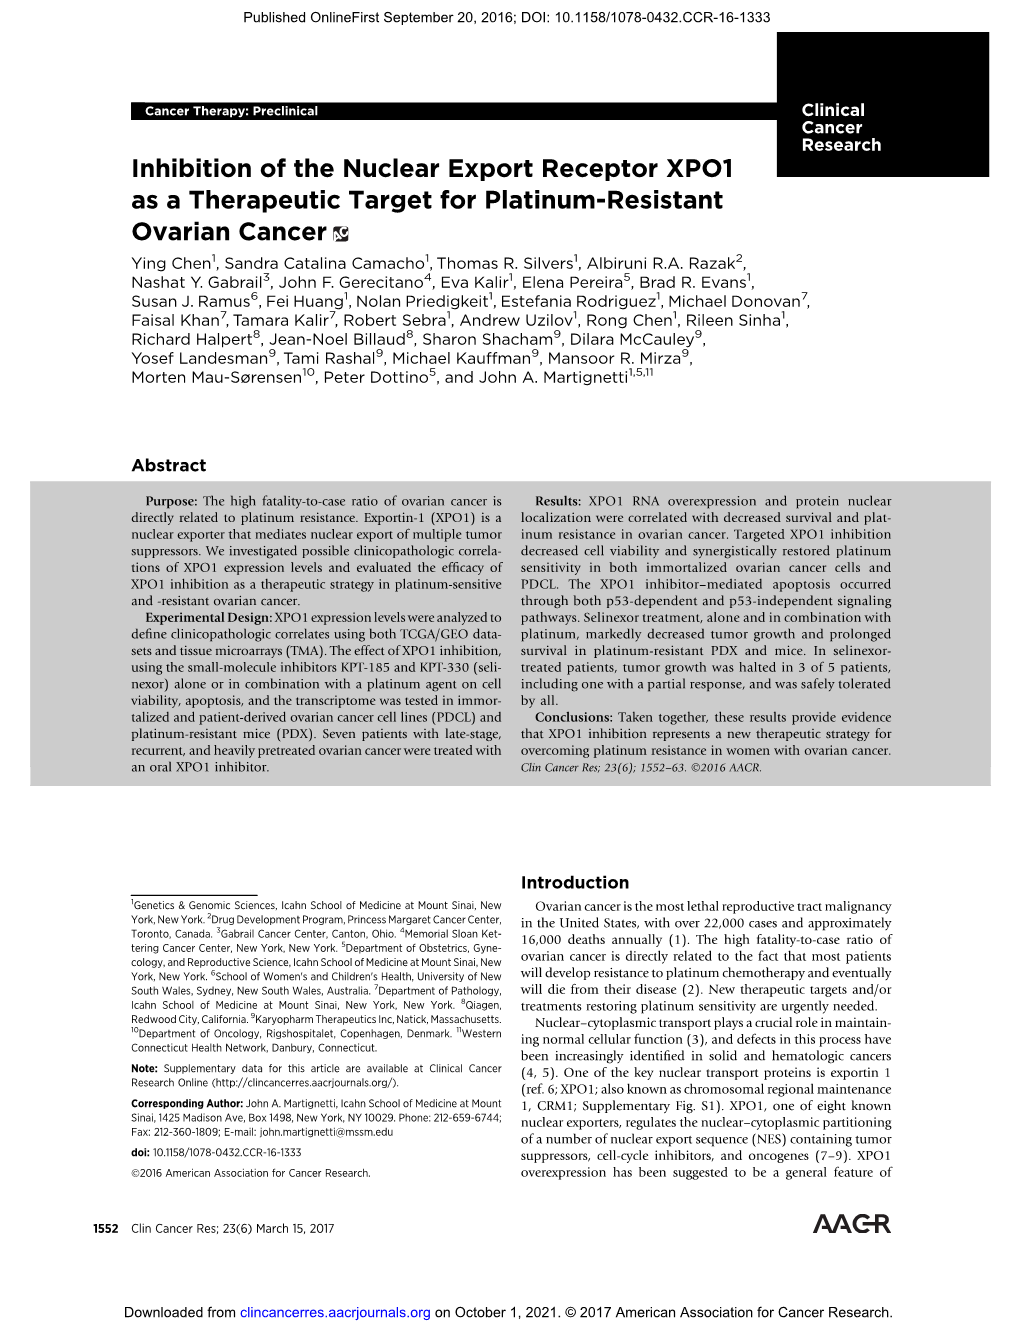 Inhibition of the Nuclear Export Receptor XPO1 As a Therapeutic Target for Platinum-Resistant Ovarian Cancer Ying Chen1, Sandra Catalina Camacho1, Thomas R